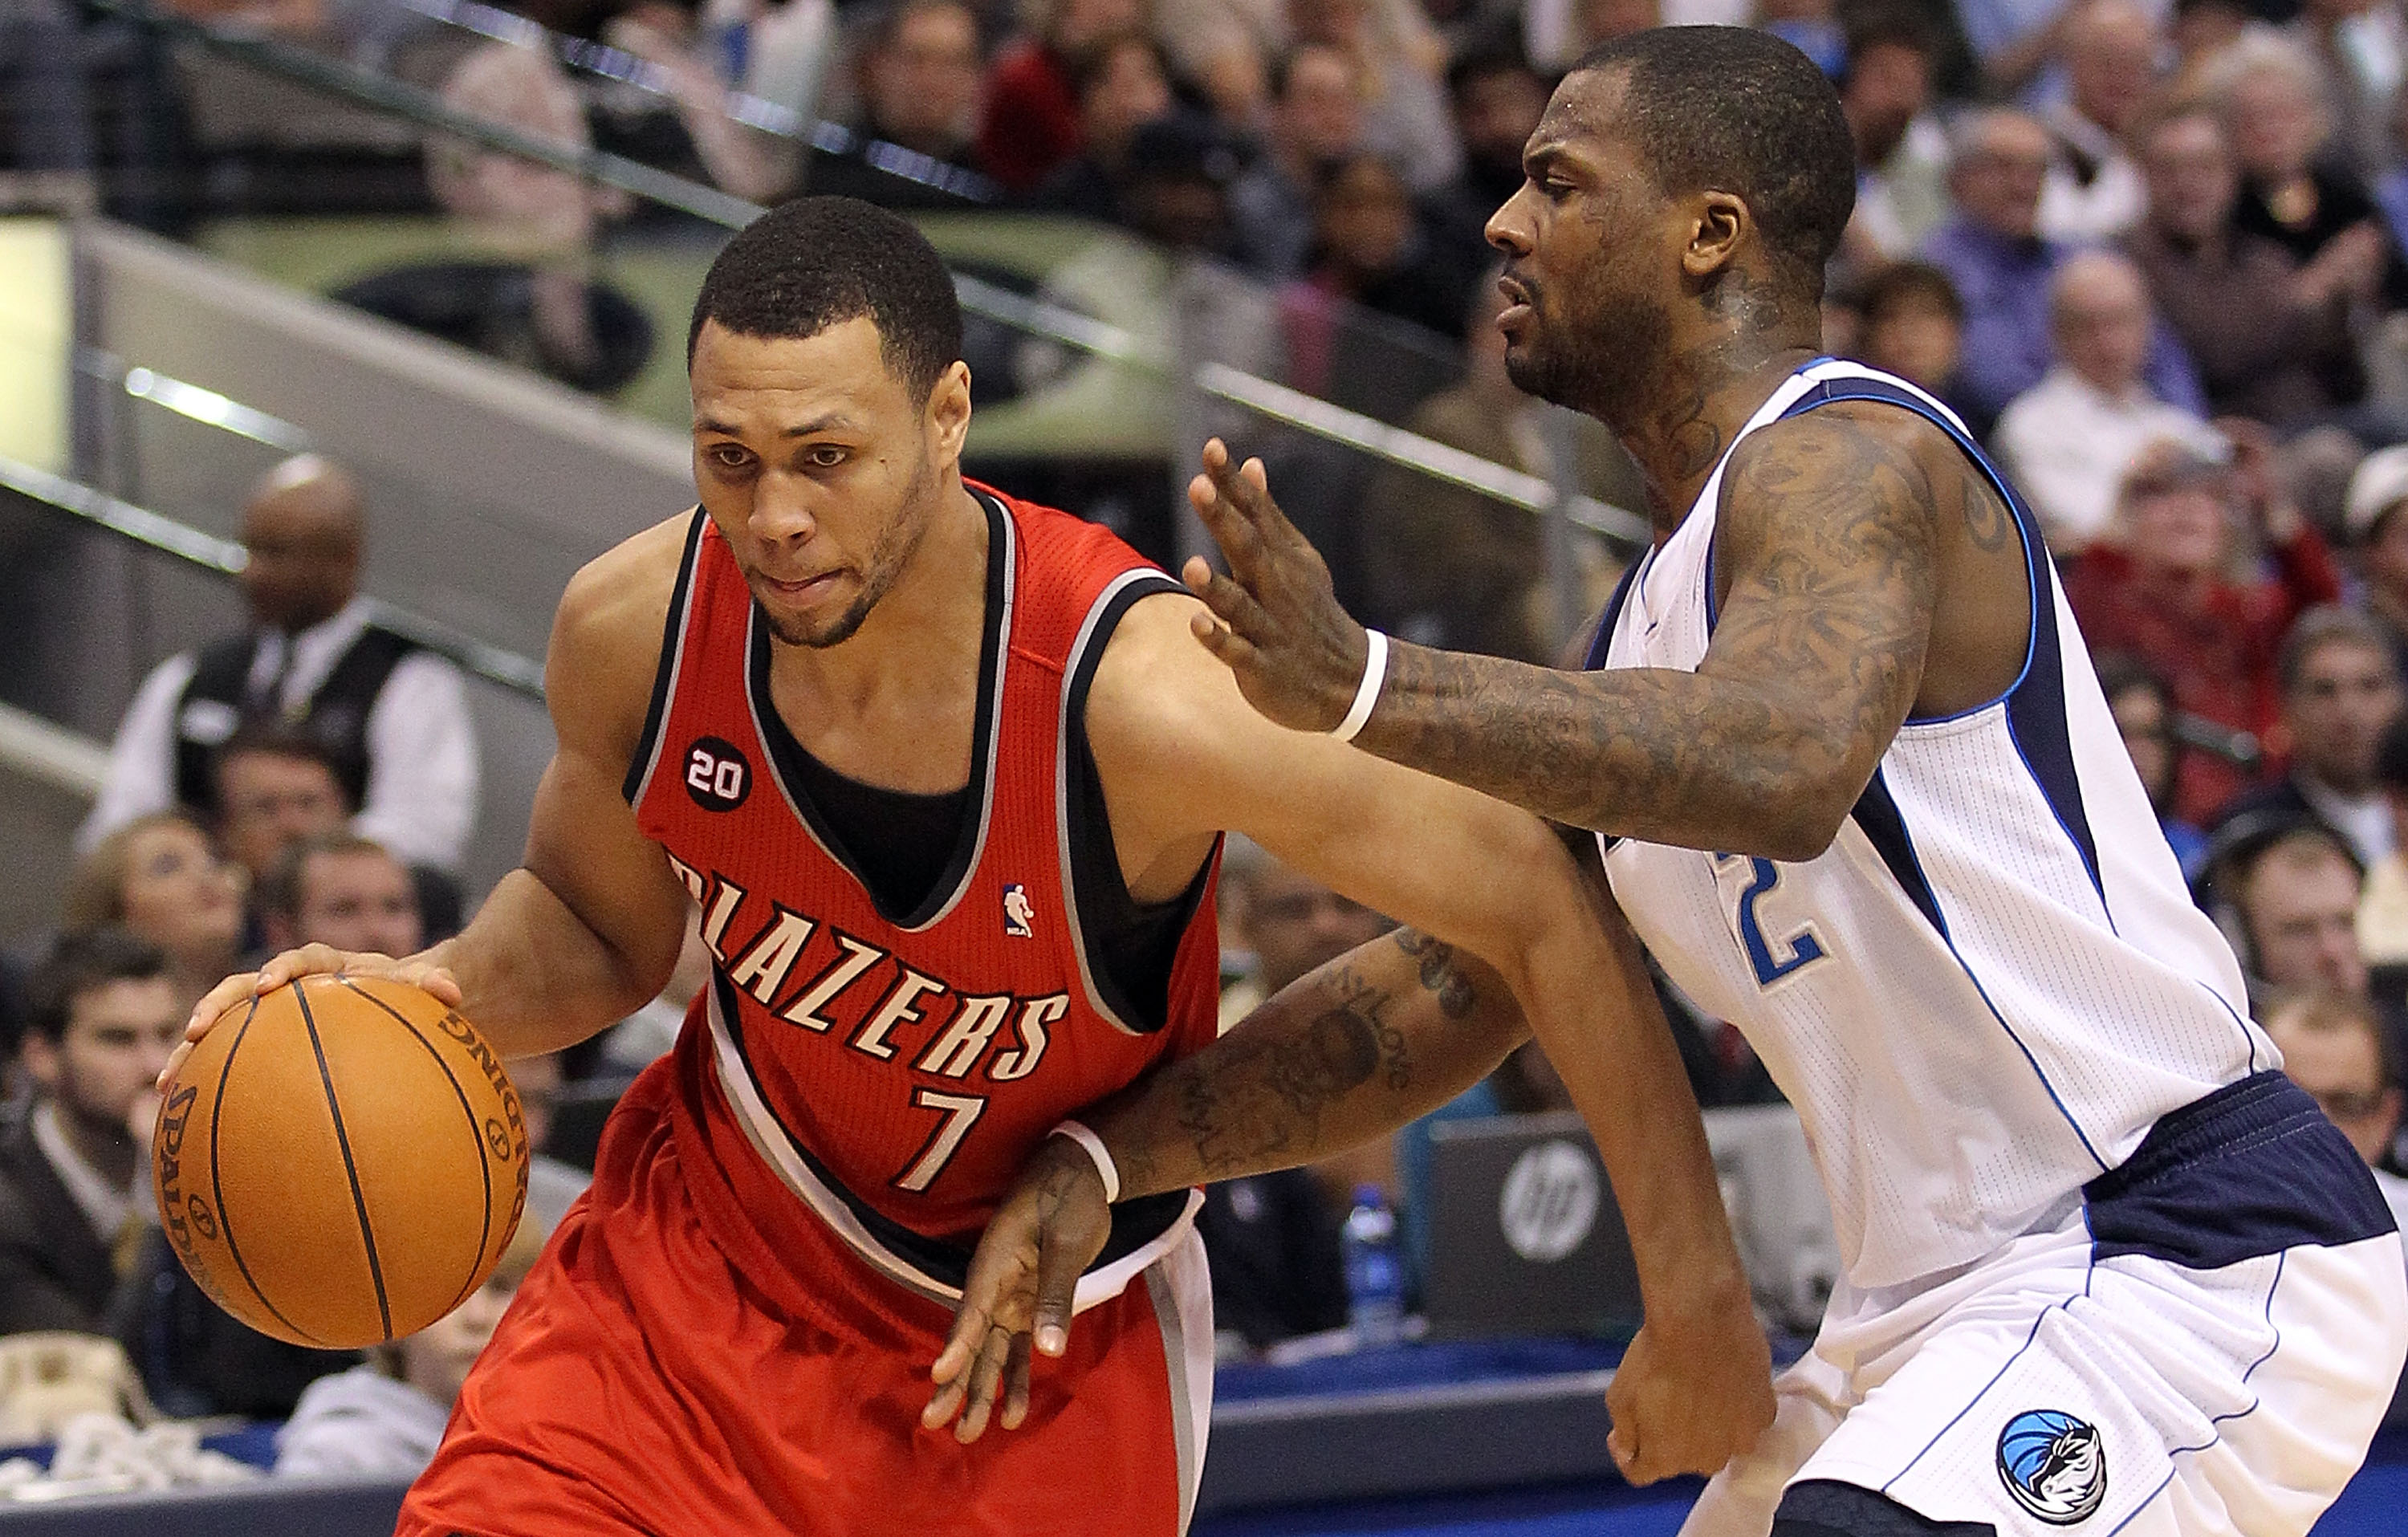 DALLAS, TX - DECEMBER 15:  Guard Brandon Roy #7 of the Portland Trail Blazers dribbles the ball past DeShawn Stevenson #2 of the Dallas Mavericks at American Airlines Center on December 15, 2010 in Dallas, Texas.  NOTE TO USER: User expressly acknowledges